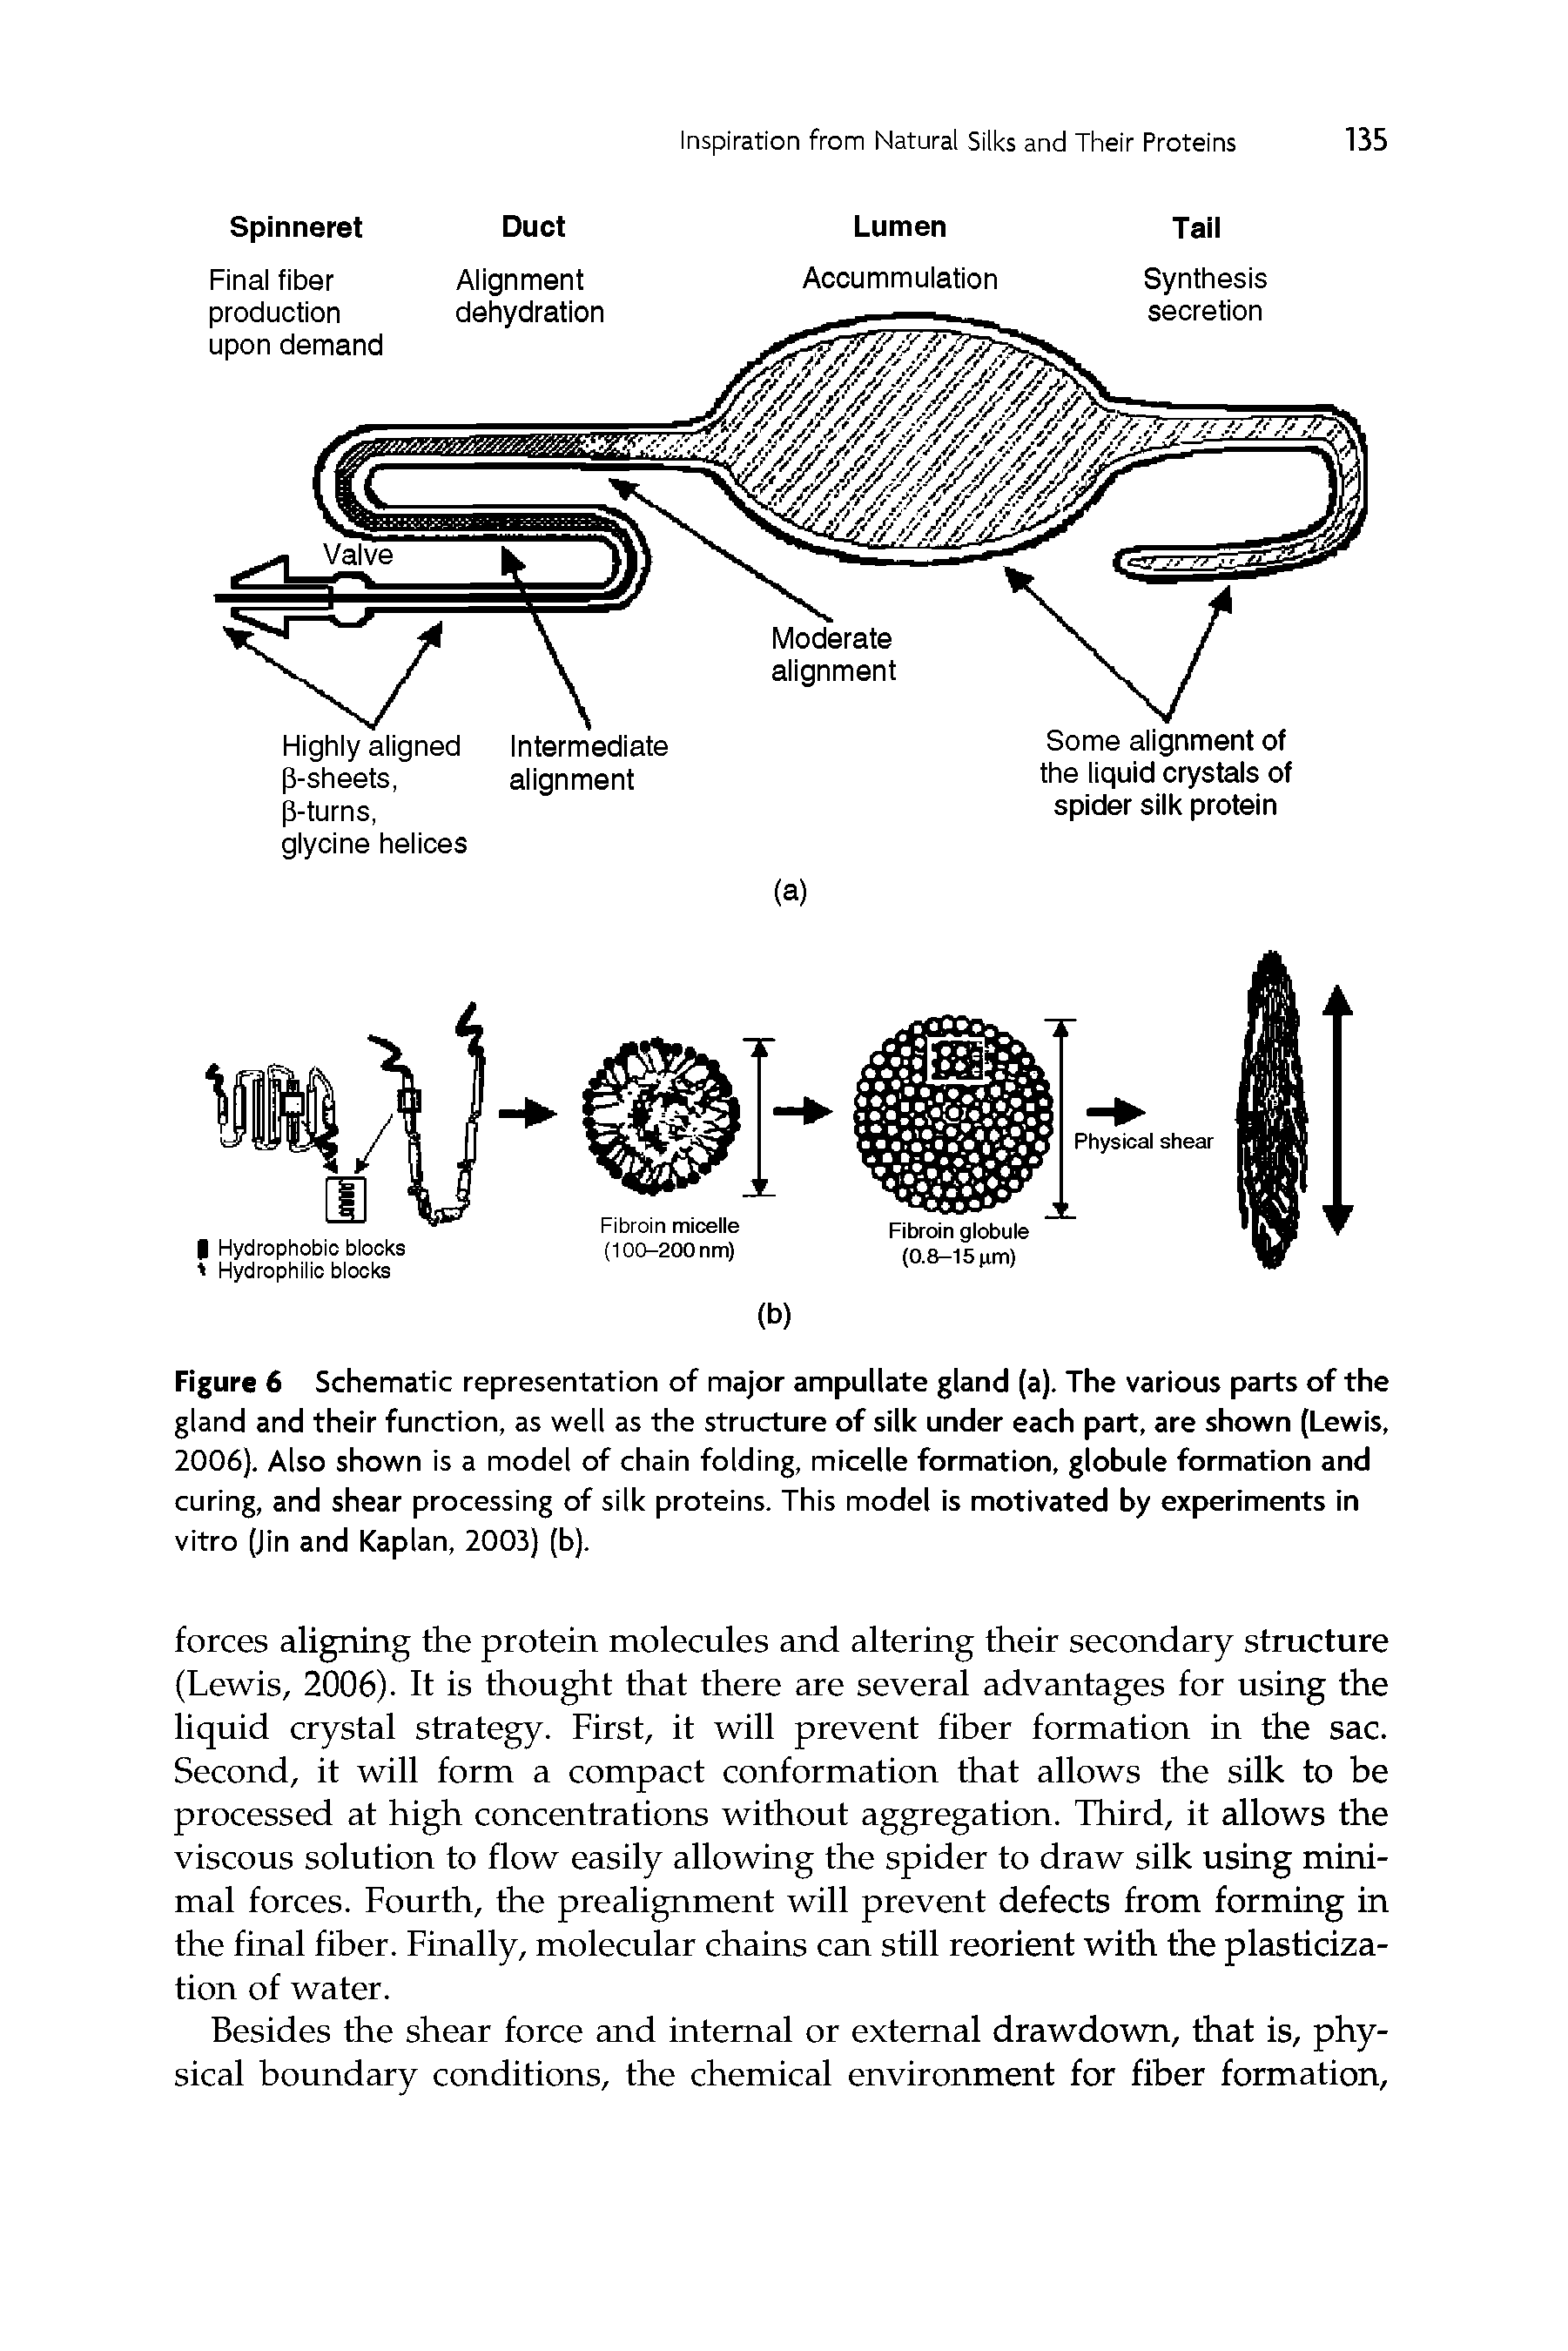 Figure 6 Schematic representation of major ampullate gland (a). The various parts of the gland and their function, as well as the structure of silk under each part, are shown (Lewis, 2006). Also shown is a model of chain folding, micelle formation, globule formation and curing, and shear processing of silk proteins. This model is motivated by experiments in vitro (Jin and Kaplan, 2003) (b).